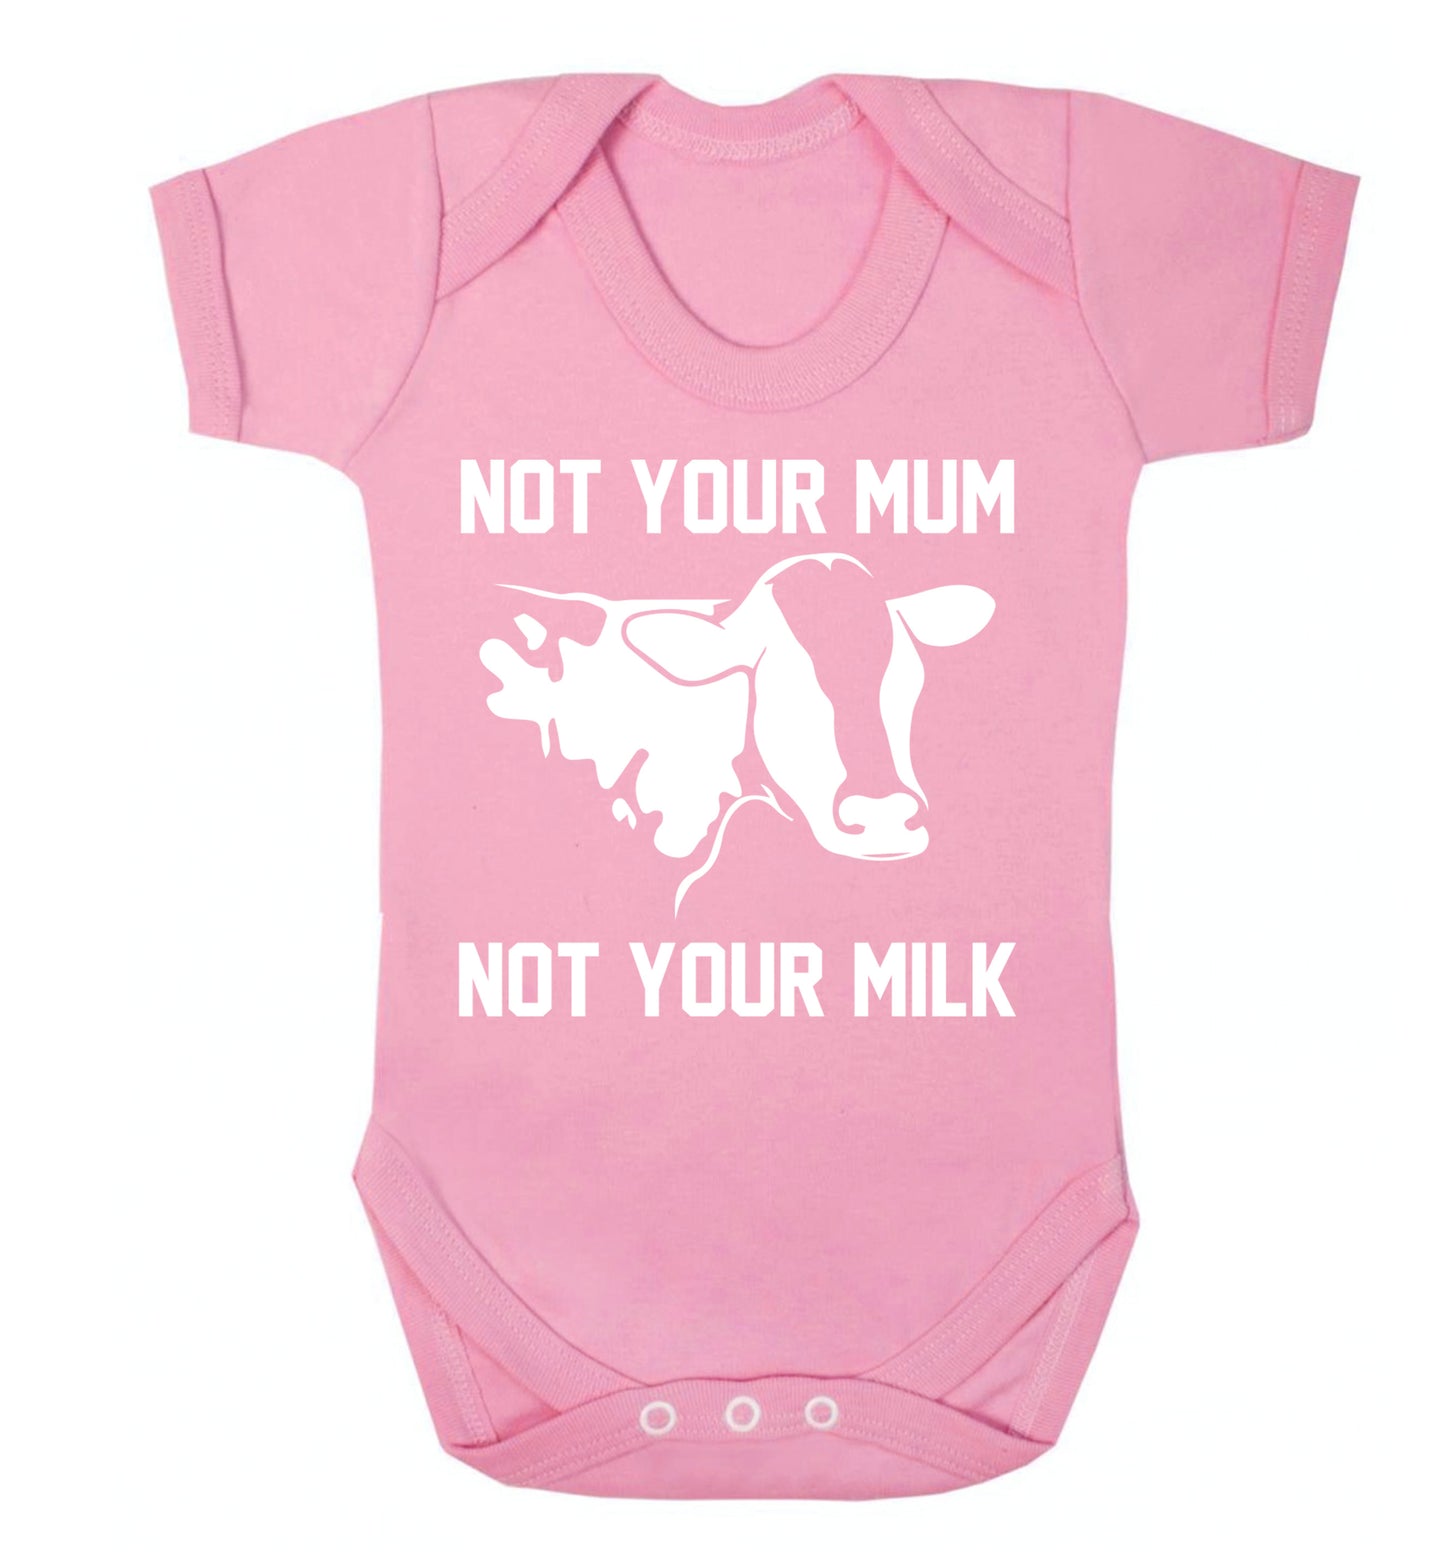 Not your mum not your milk Baby Vest pale pink 18-24 months